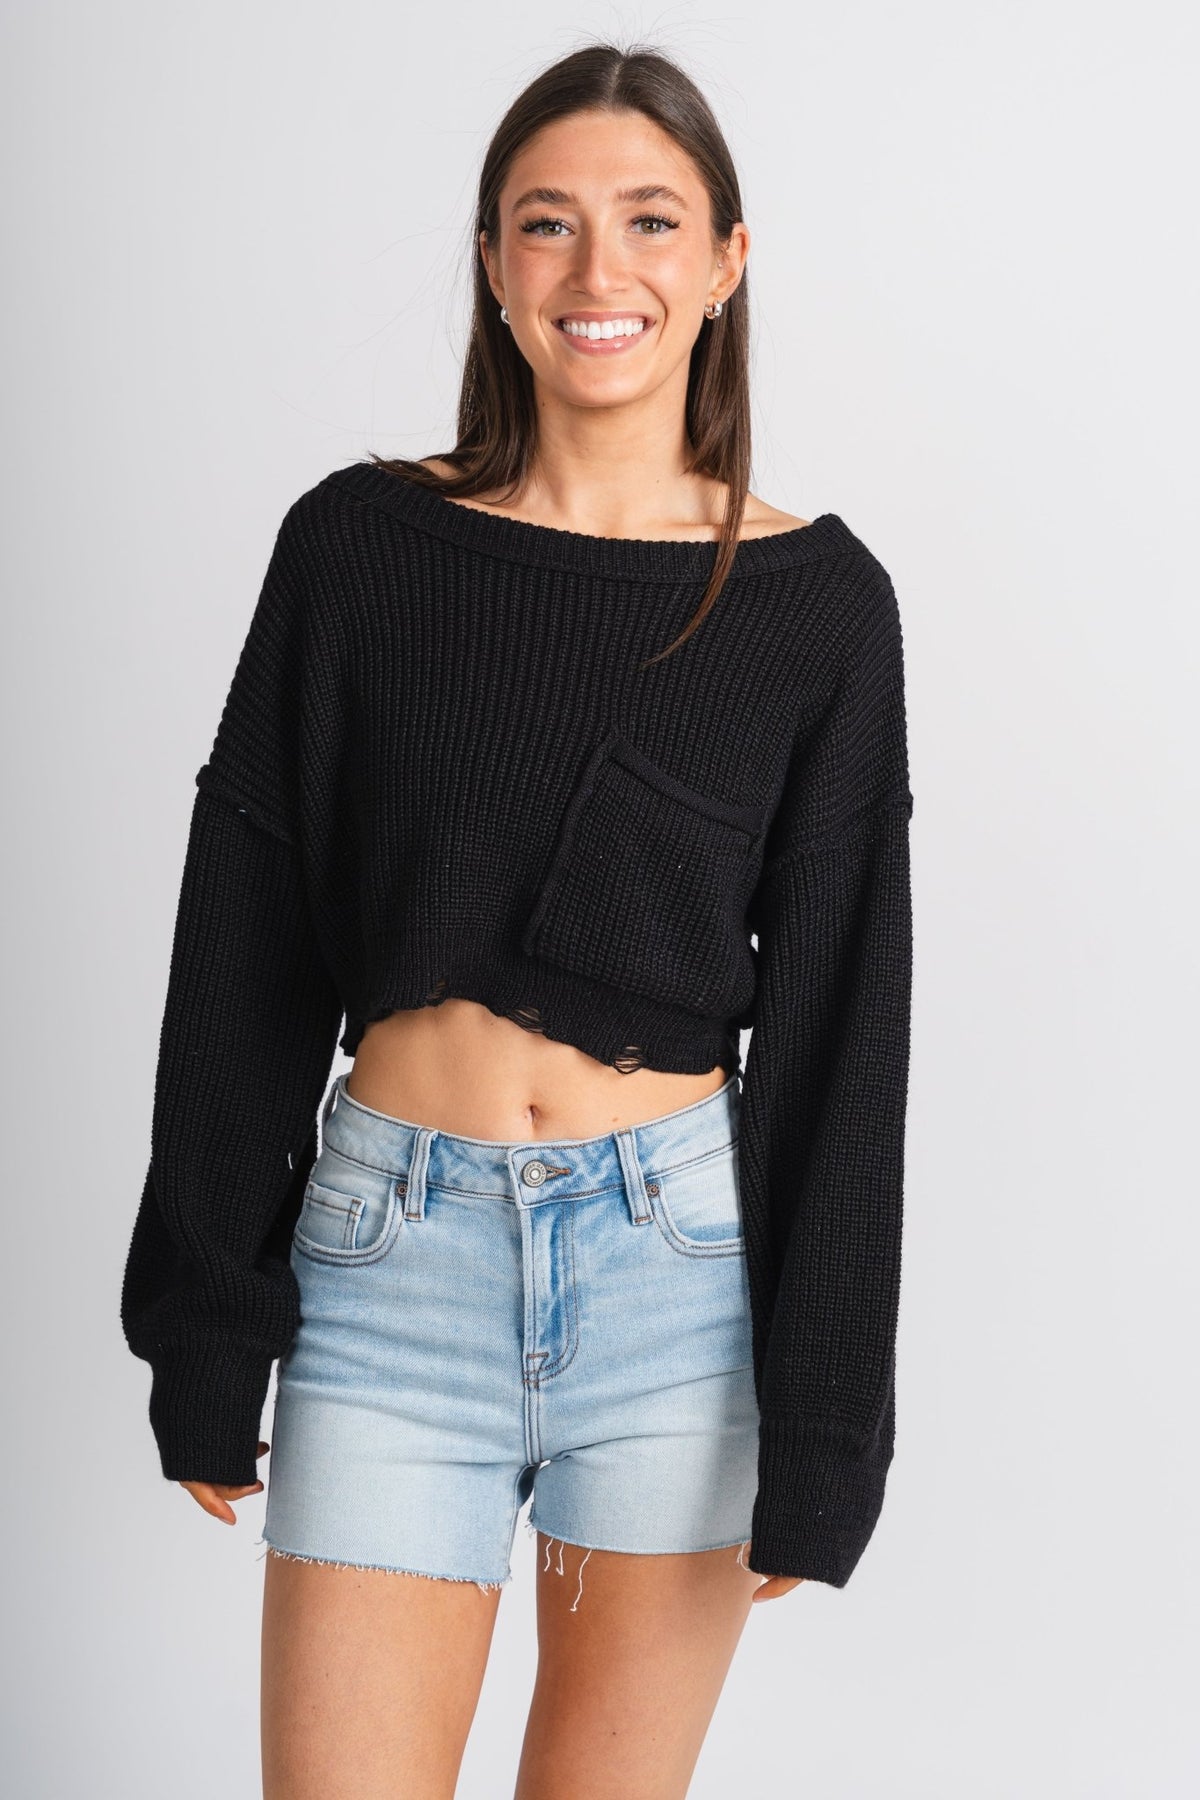 Distressed crop sweater black – Boutique Sweaters | Fashionable Sweaters at Lush Fashion Lounge Boutique in Oklahoma City